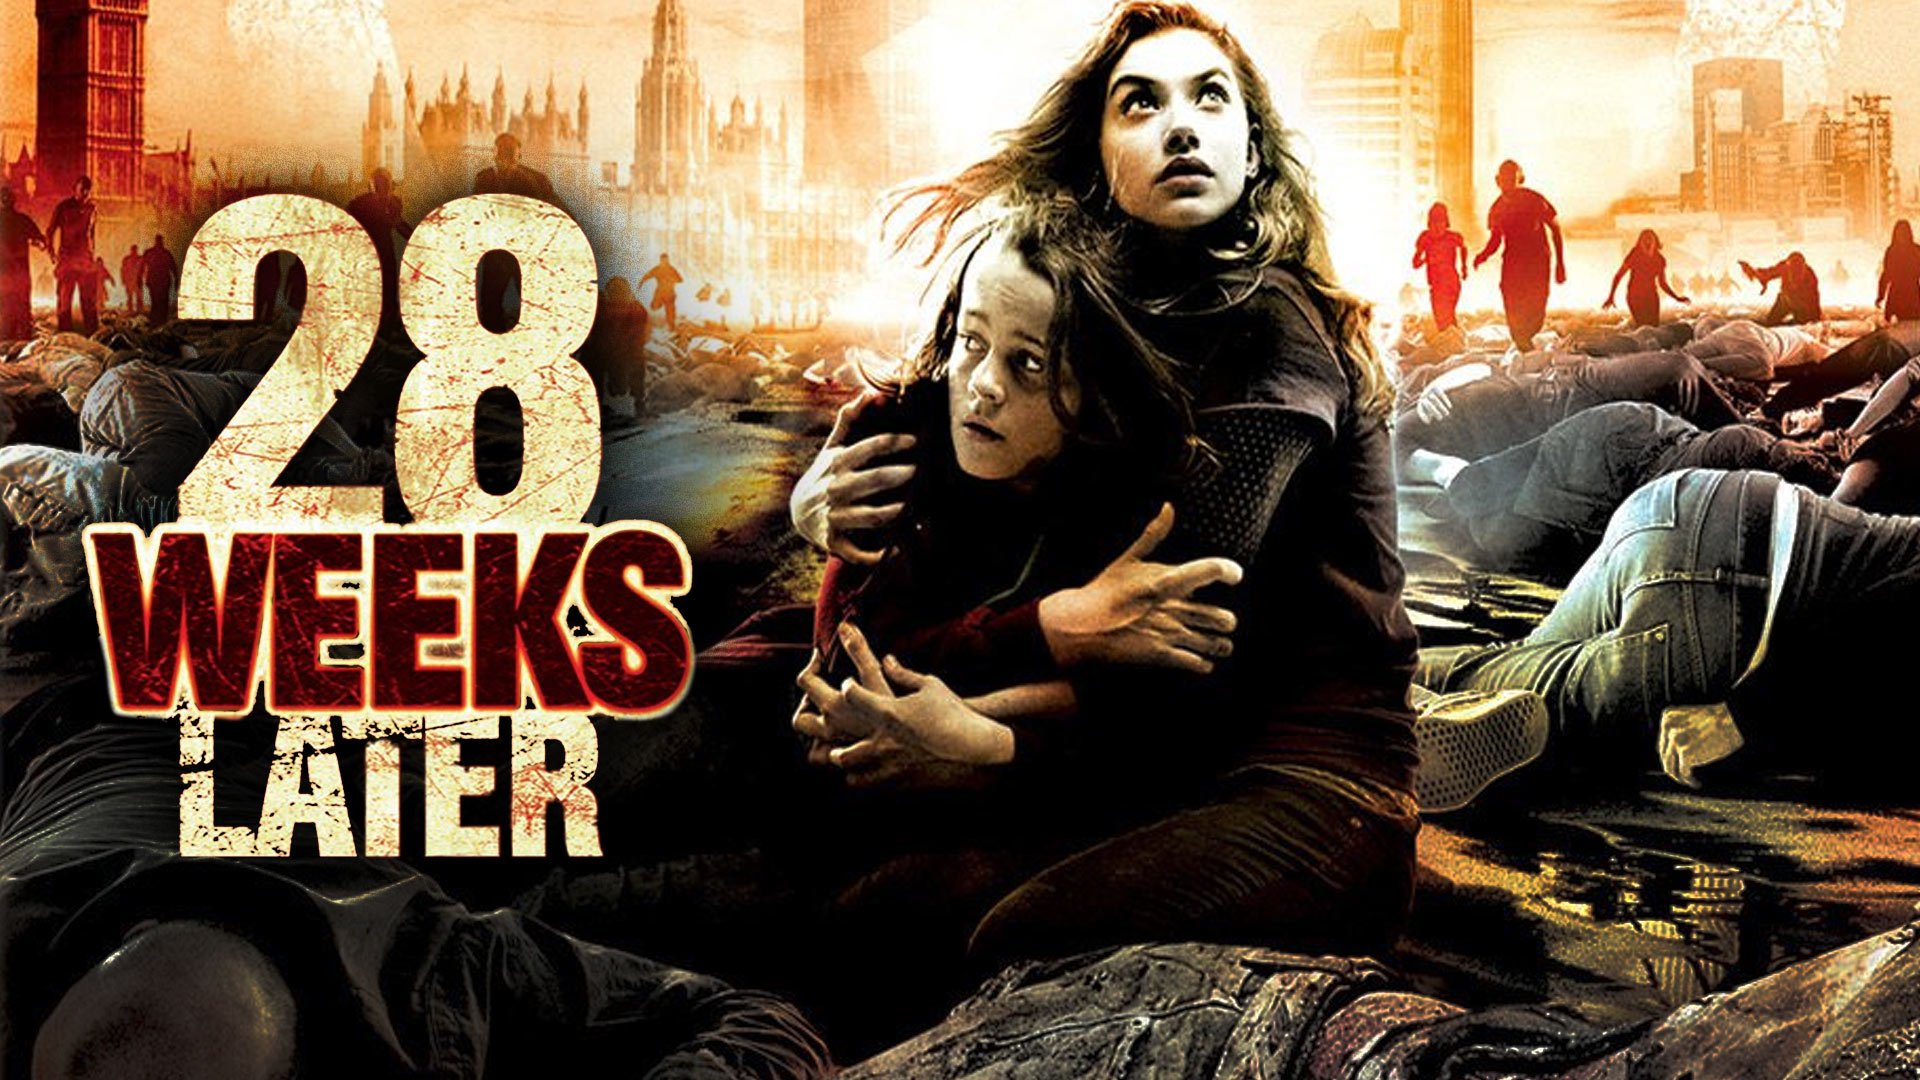 Weeks Later (2007)